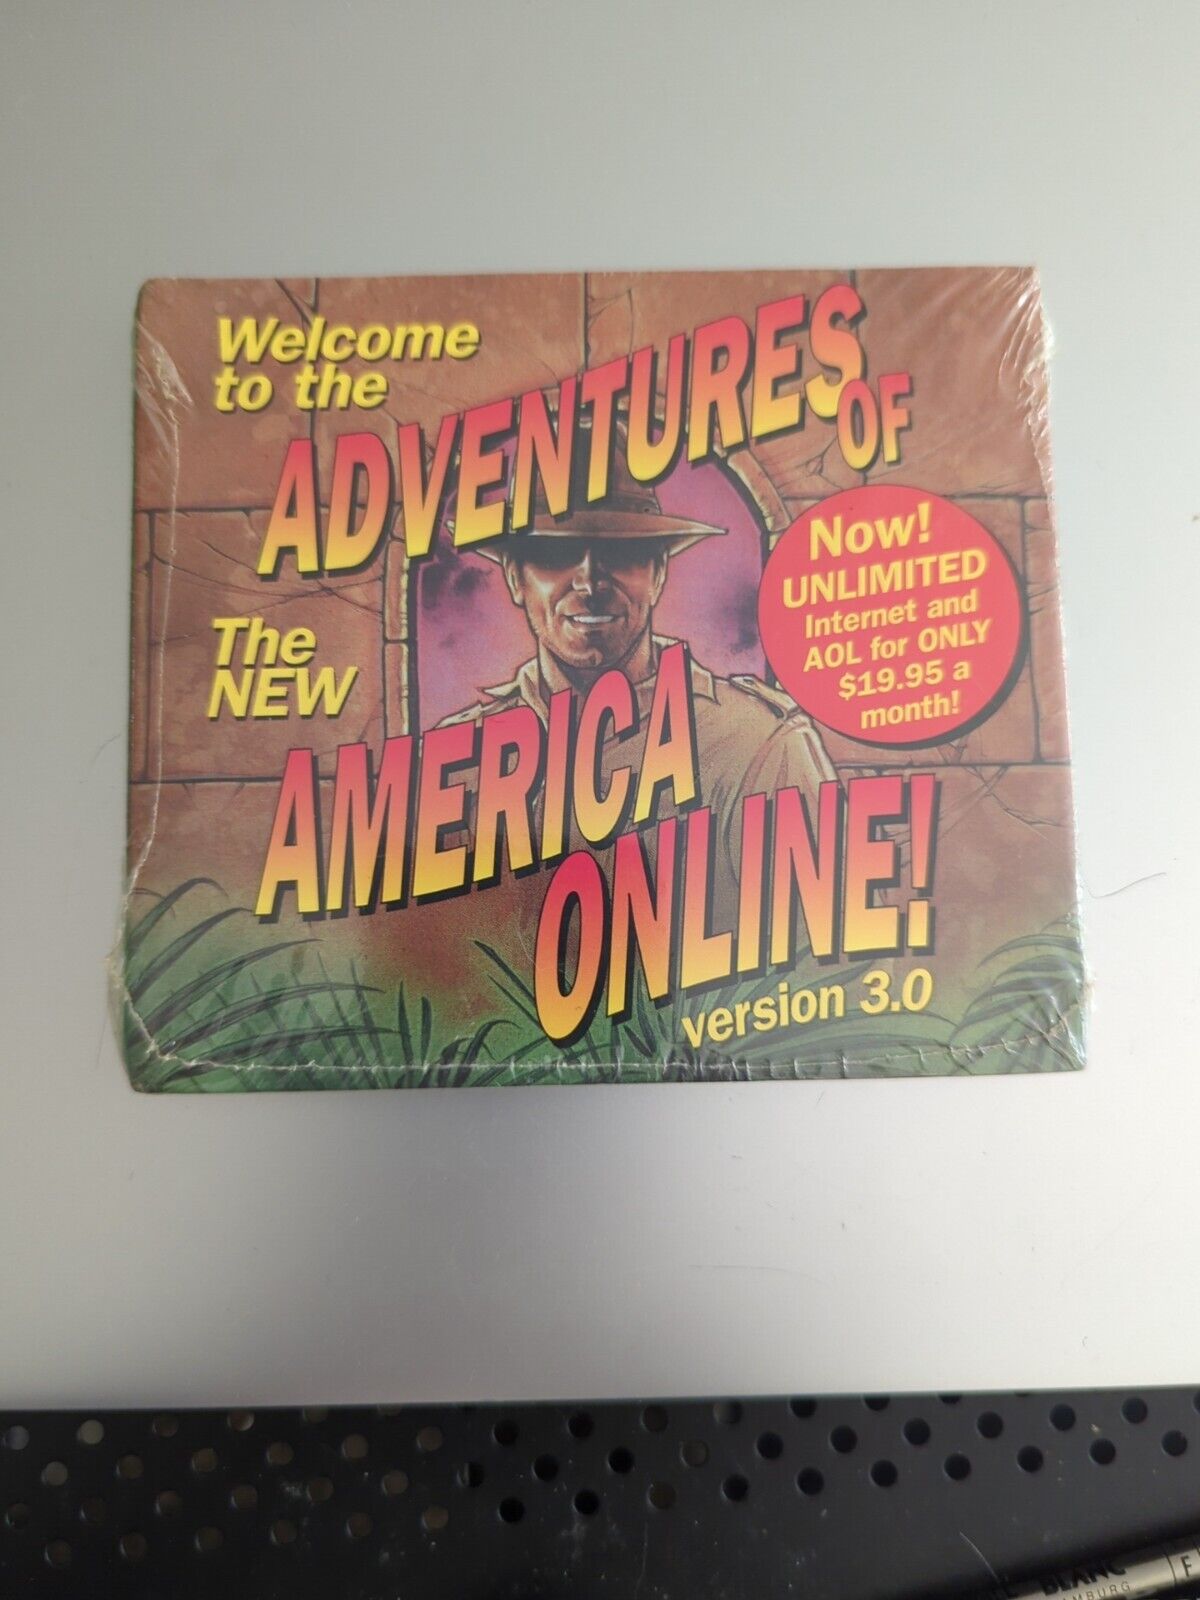 New sealed AOL CD-ROM Disc Adventures of America Online 3.0 Indiana Jones Themed